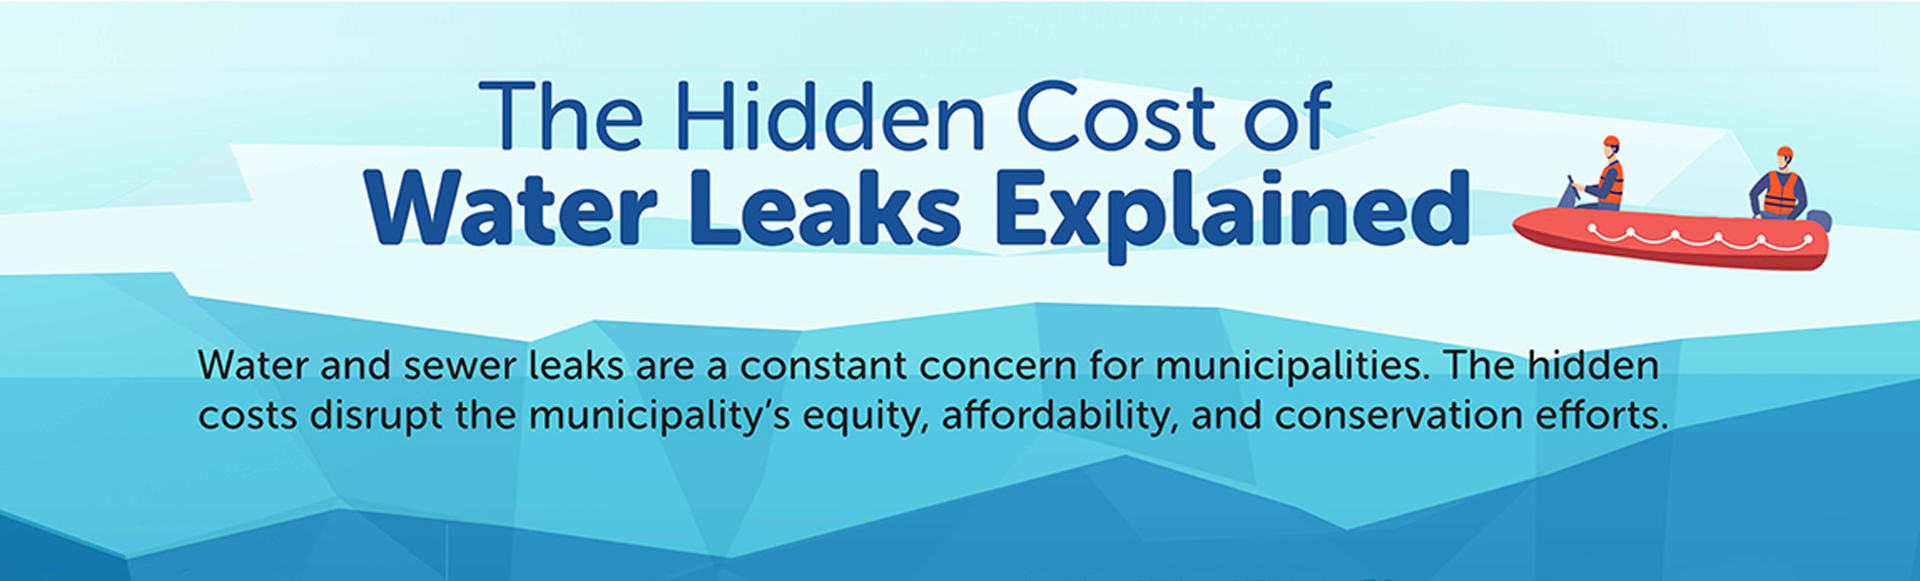 The Hidden Cost of Water Leaks Explained